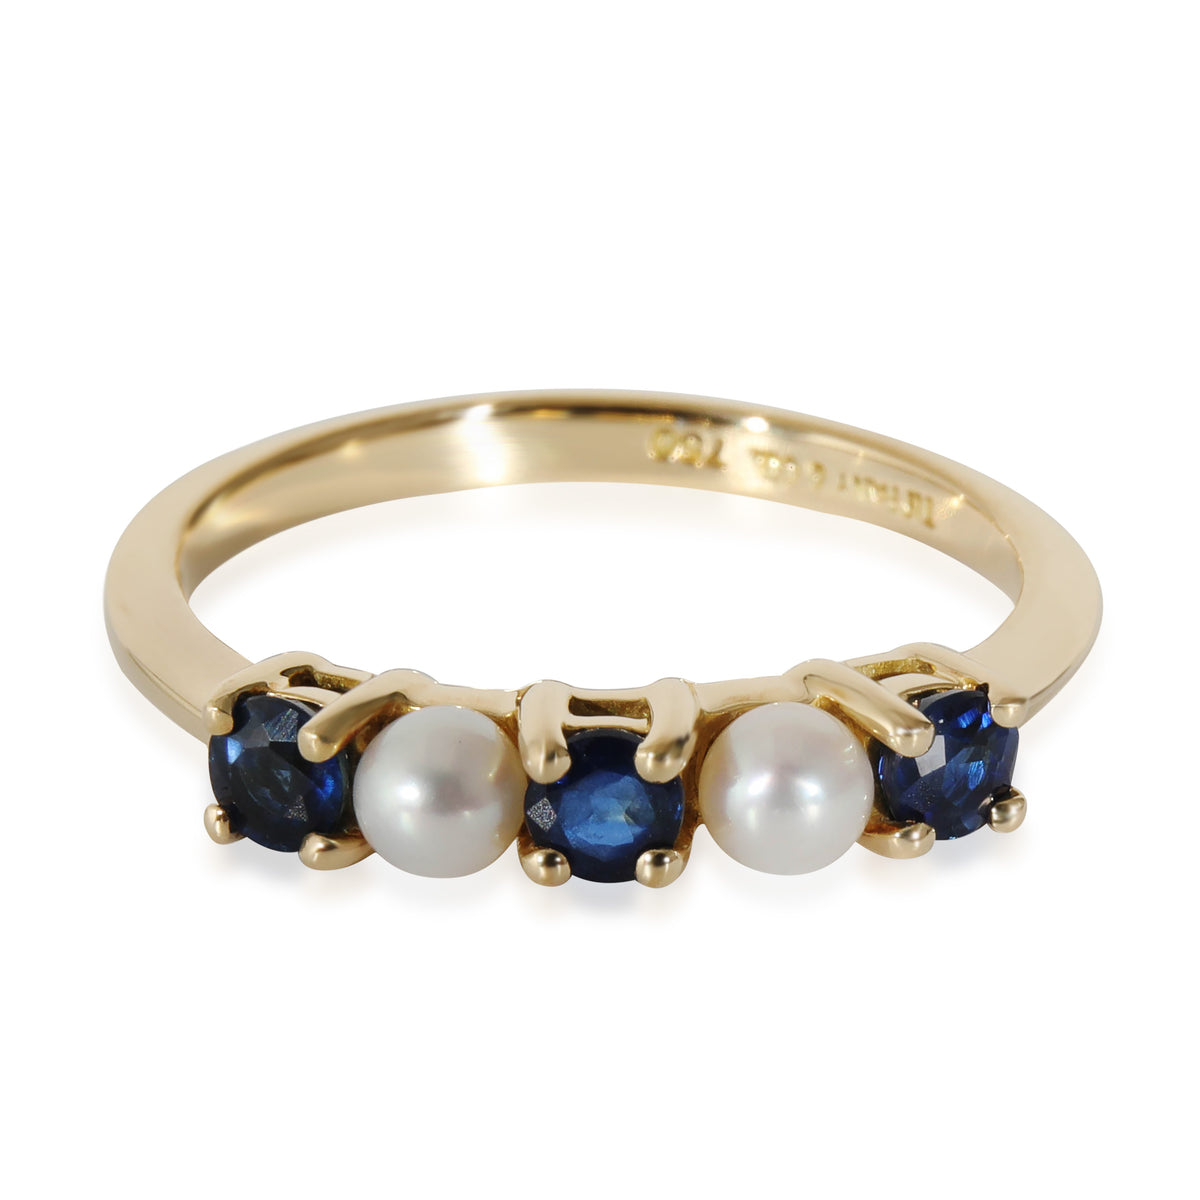 Tiffany & Co. Vintage Pearl & Sapphire Band in 18k Yellow Gold